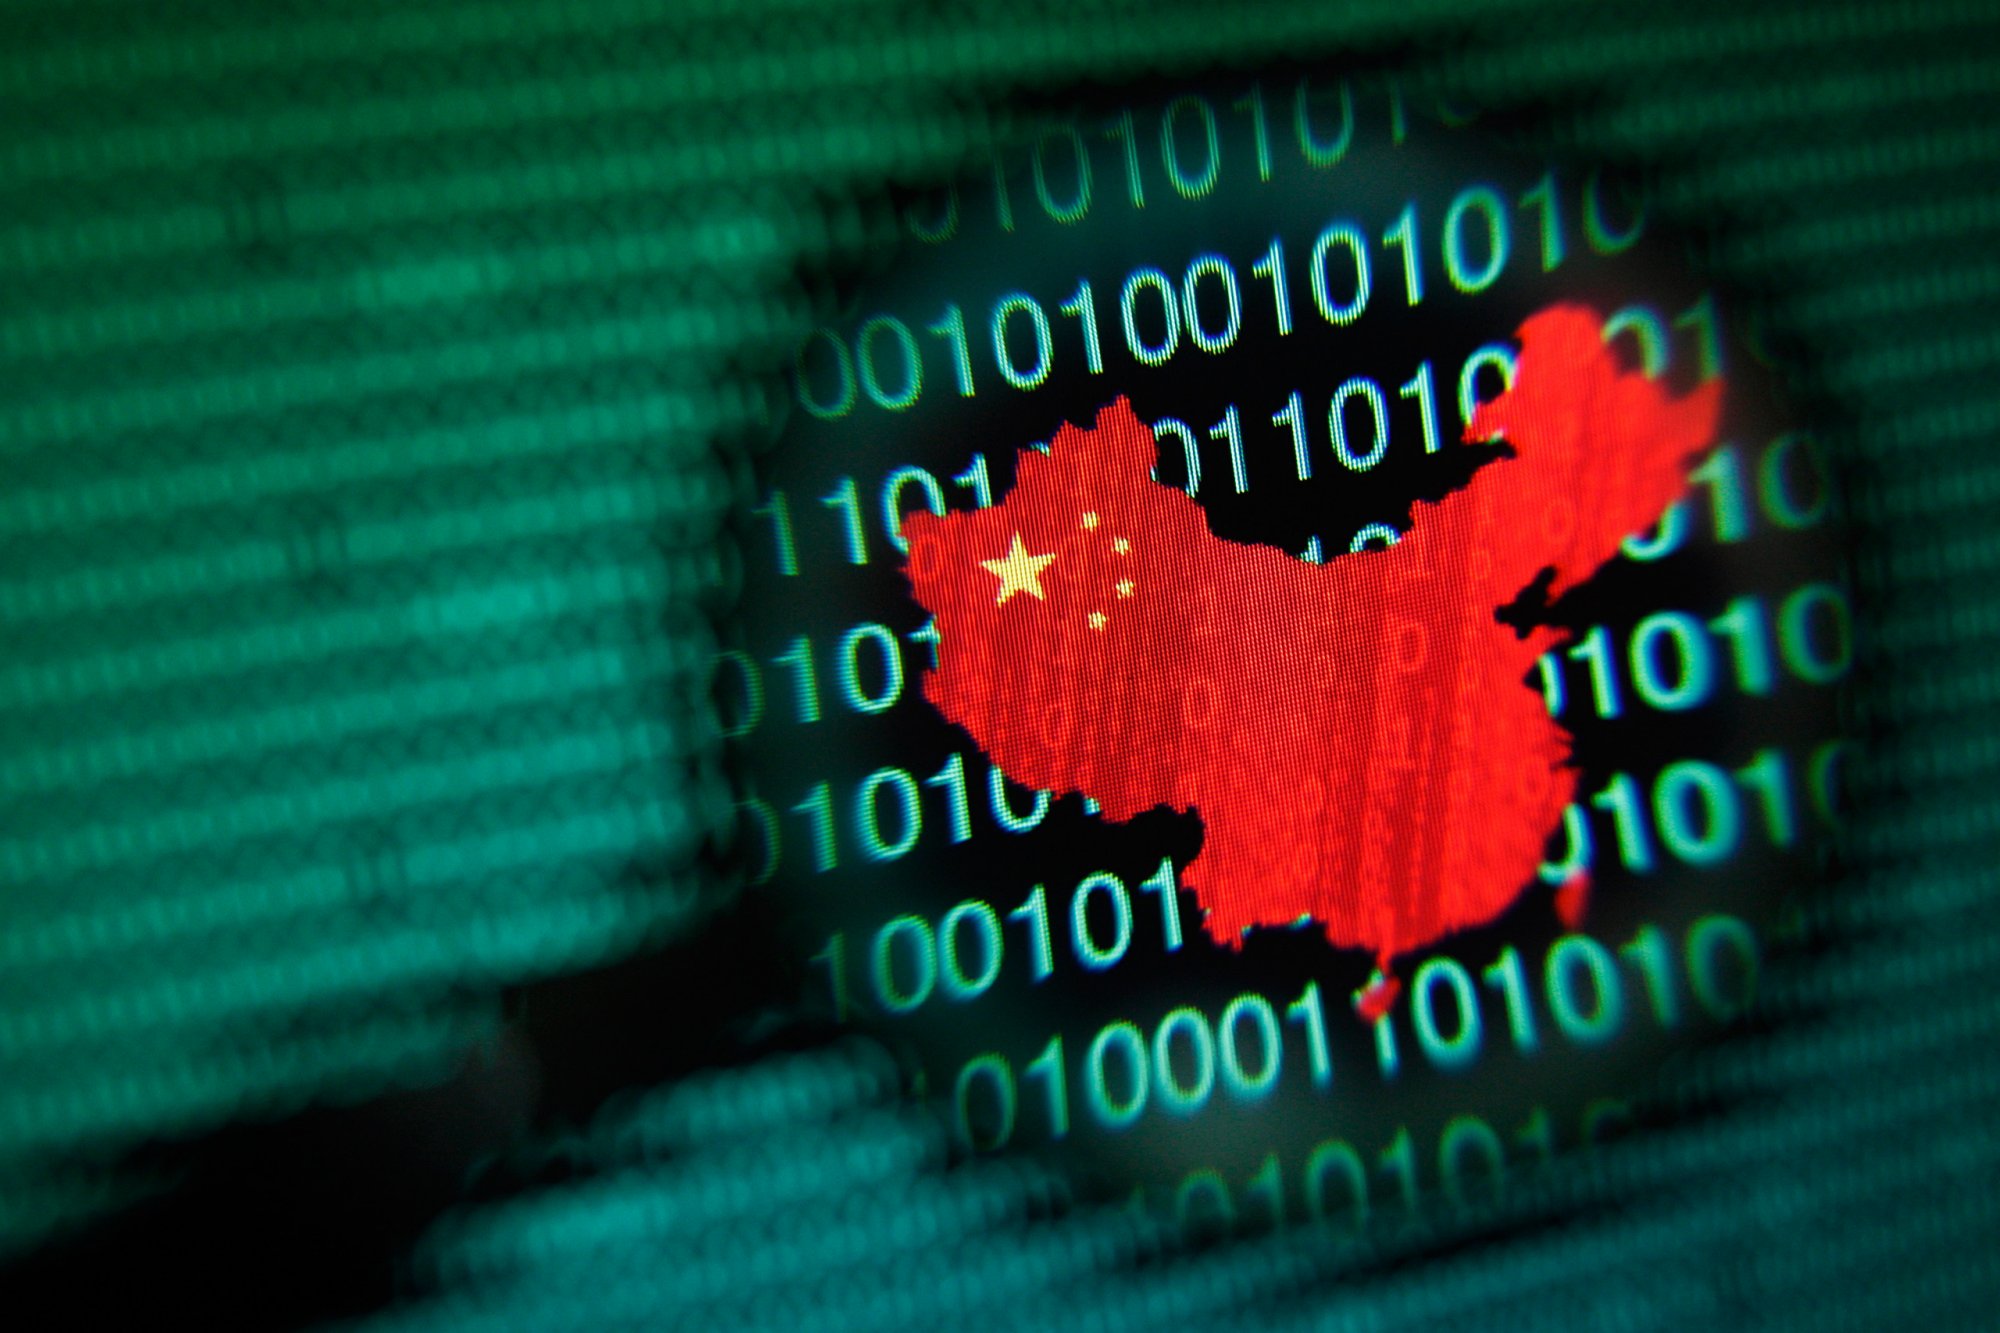 China hacking and penetration of critical U.S. infrastructure systems worse than previous thought